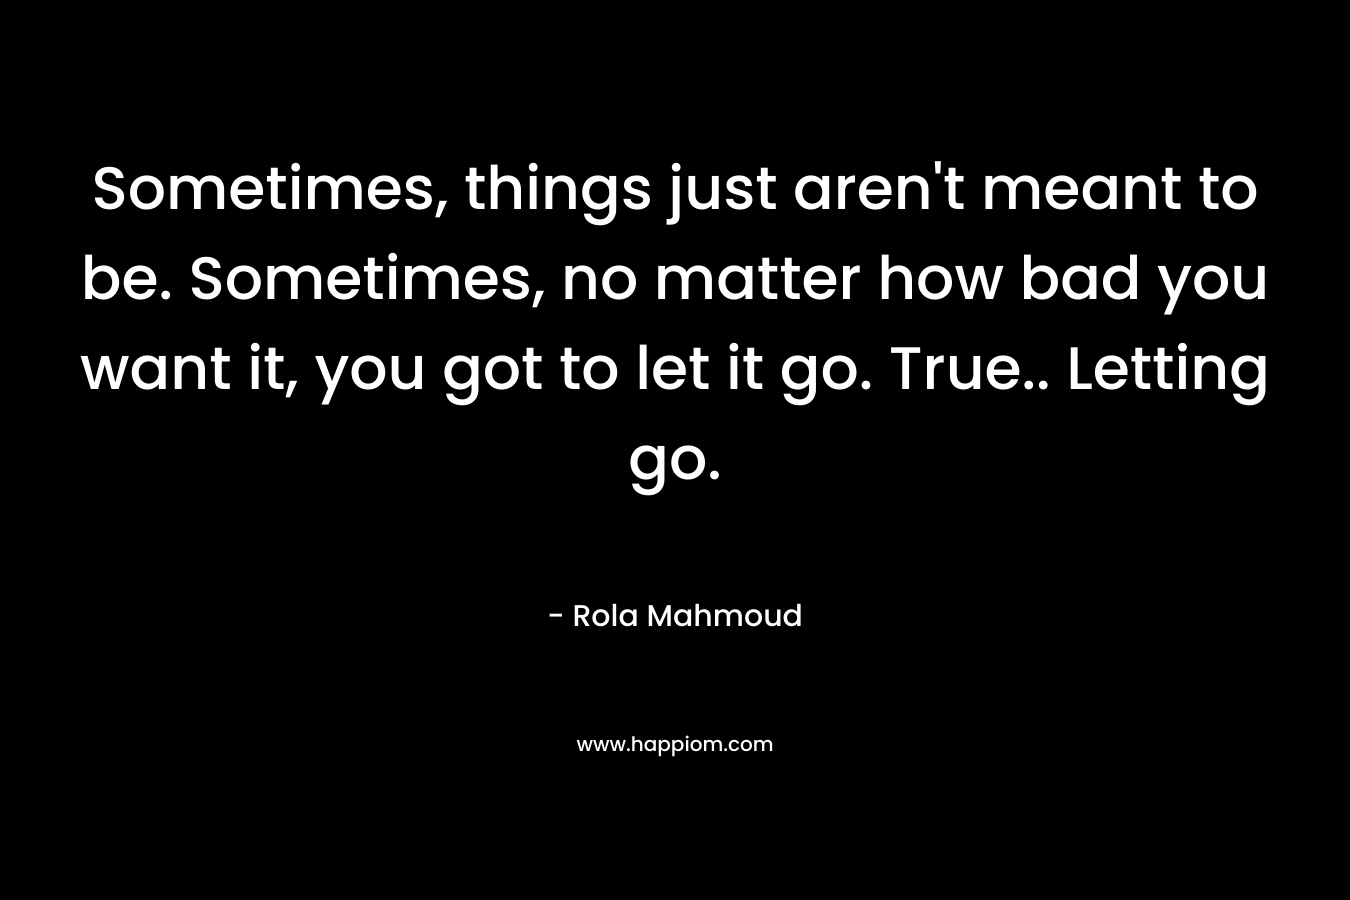 Sometimes, things just aren’t meant to be. Sometimes, no matter how bad you want it, you got to let it go. True.. Letting go. – Rola Mahmoud